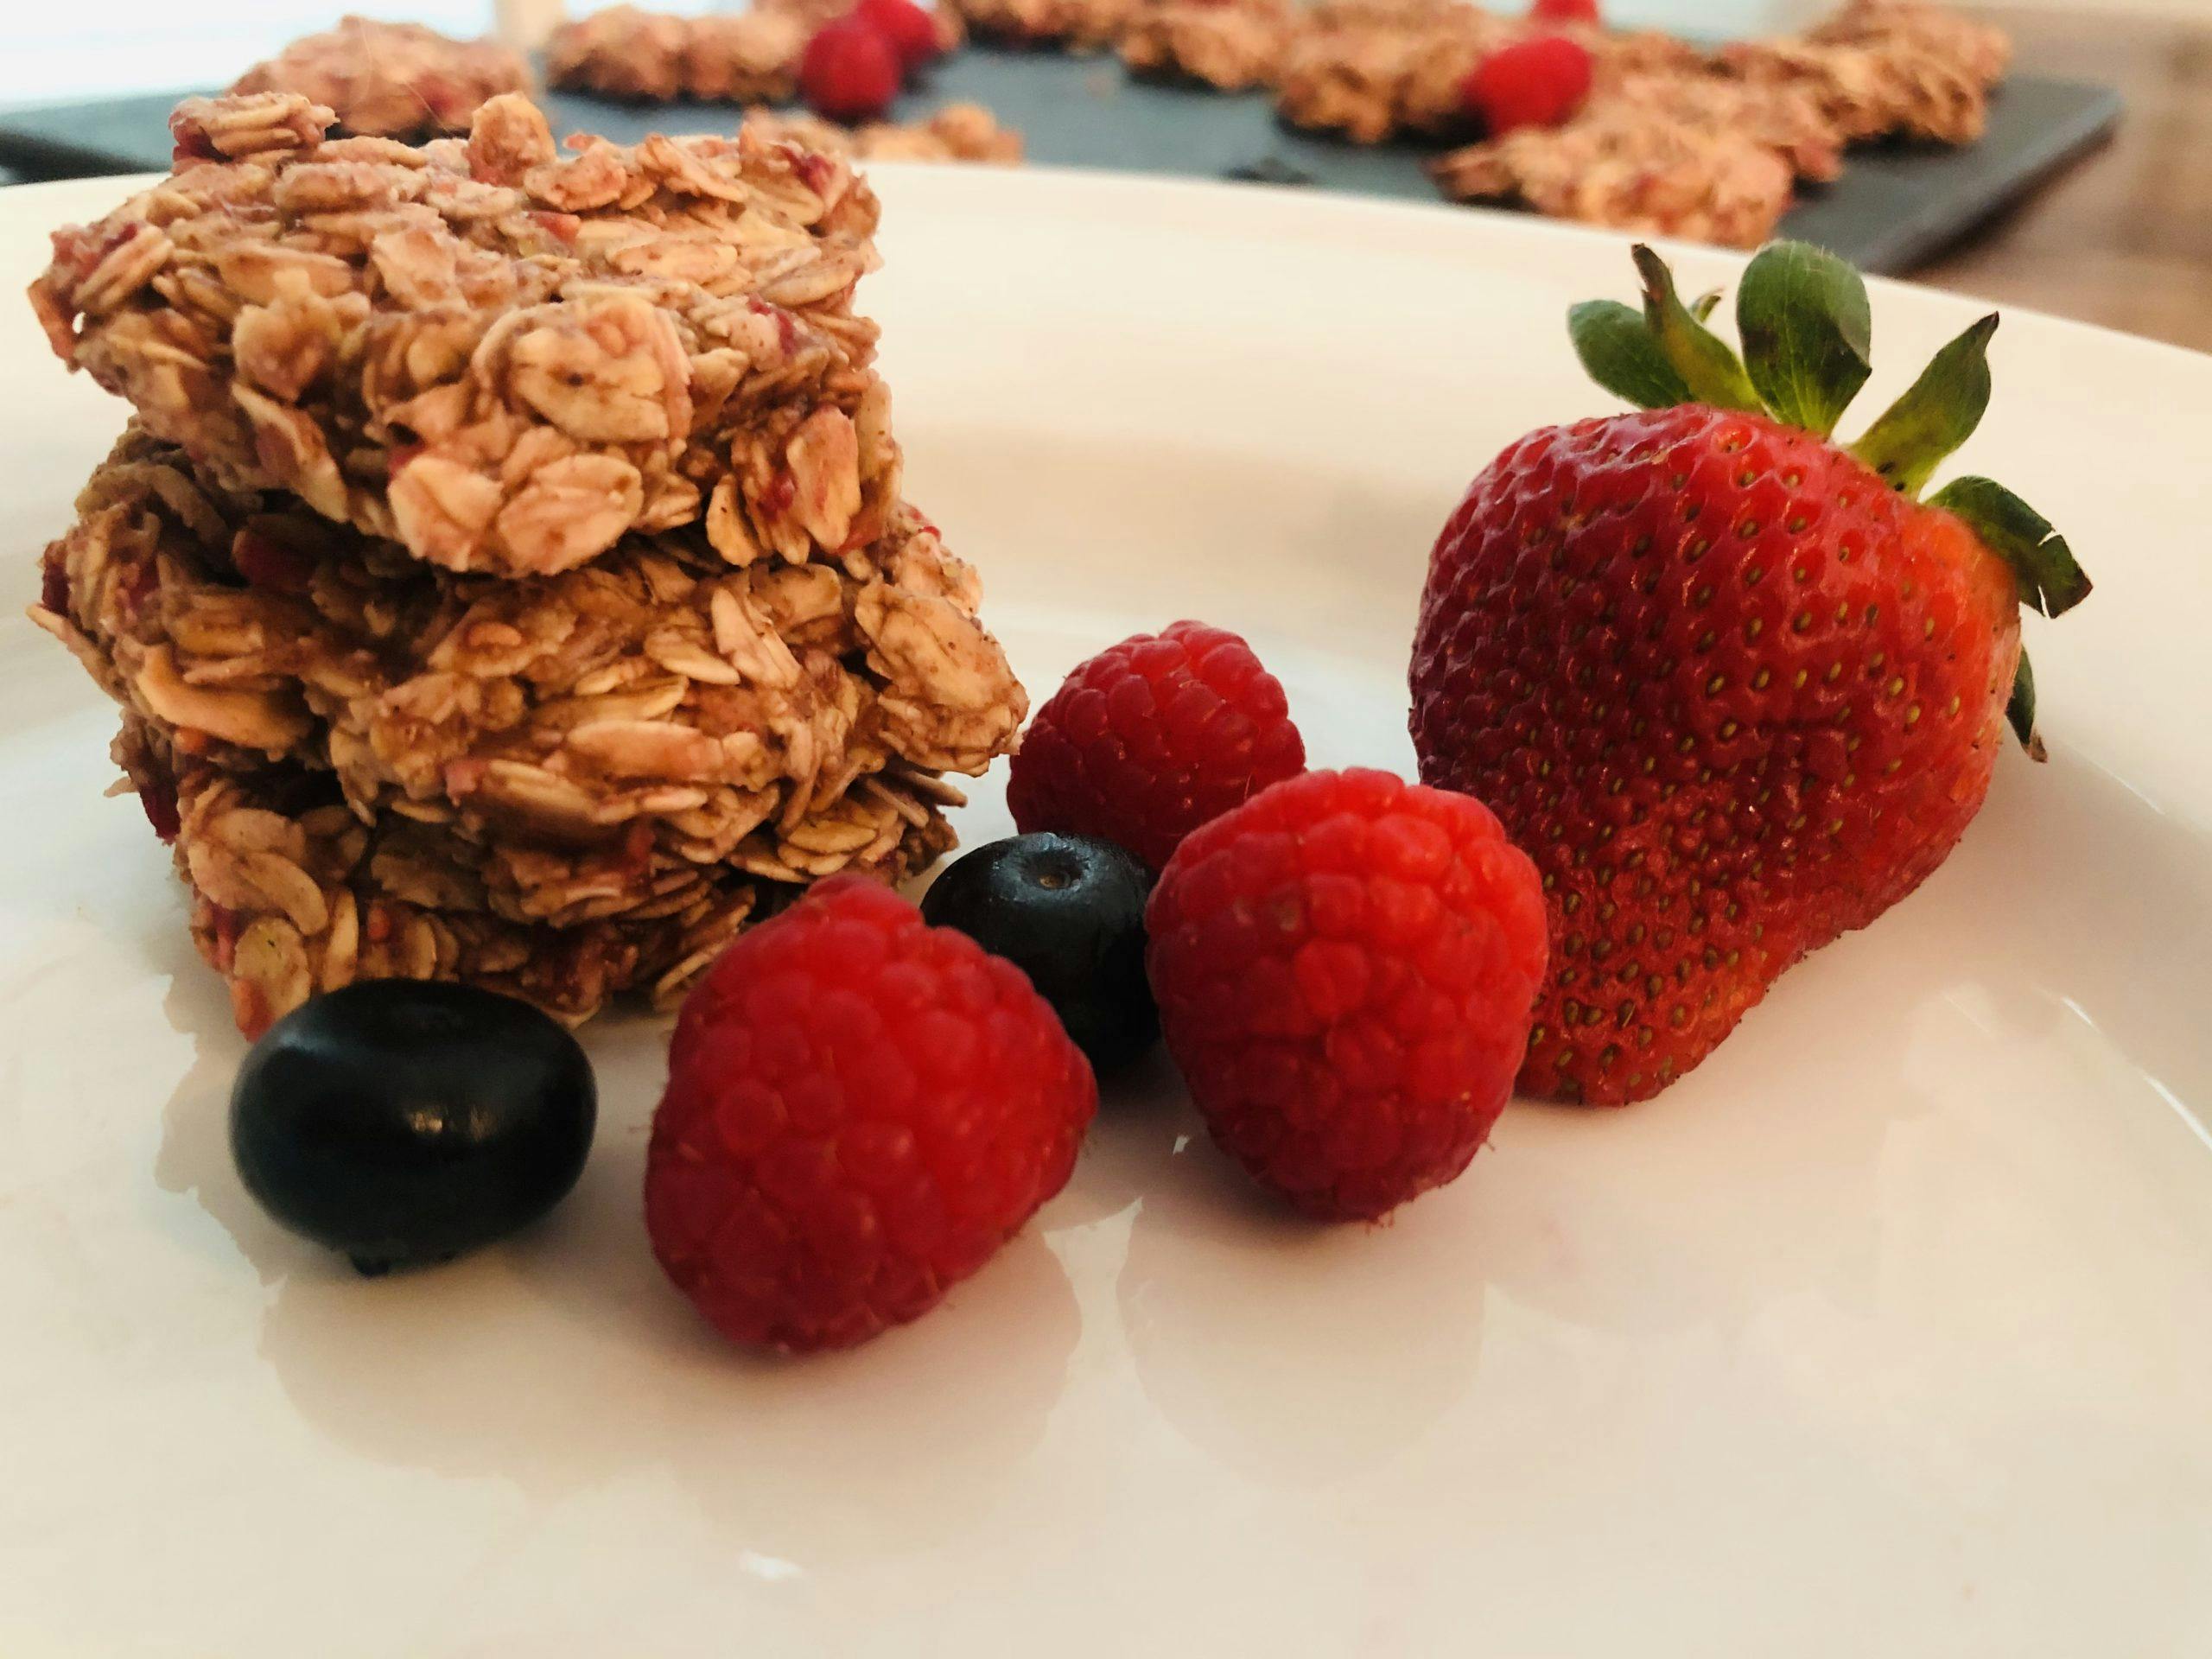 Healthy and Simple No-Bake Oatmeal Raspberry Cookie Recipe